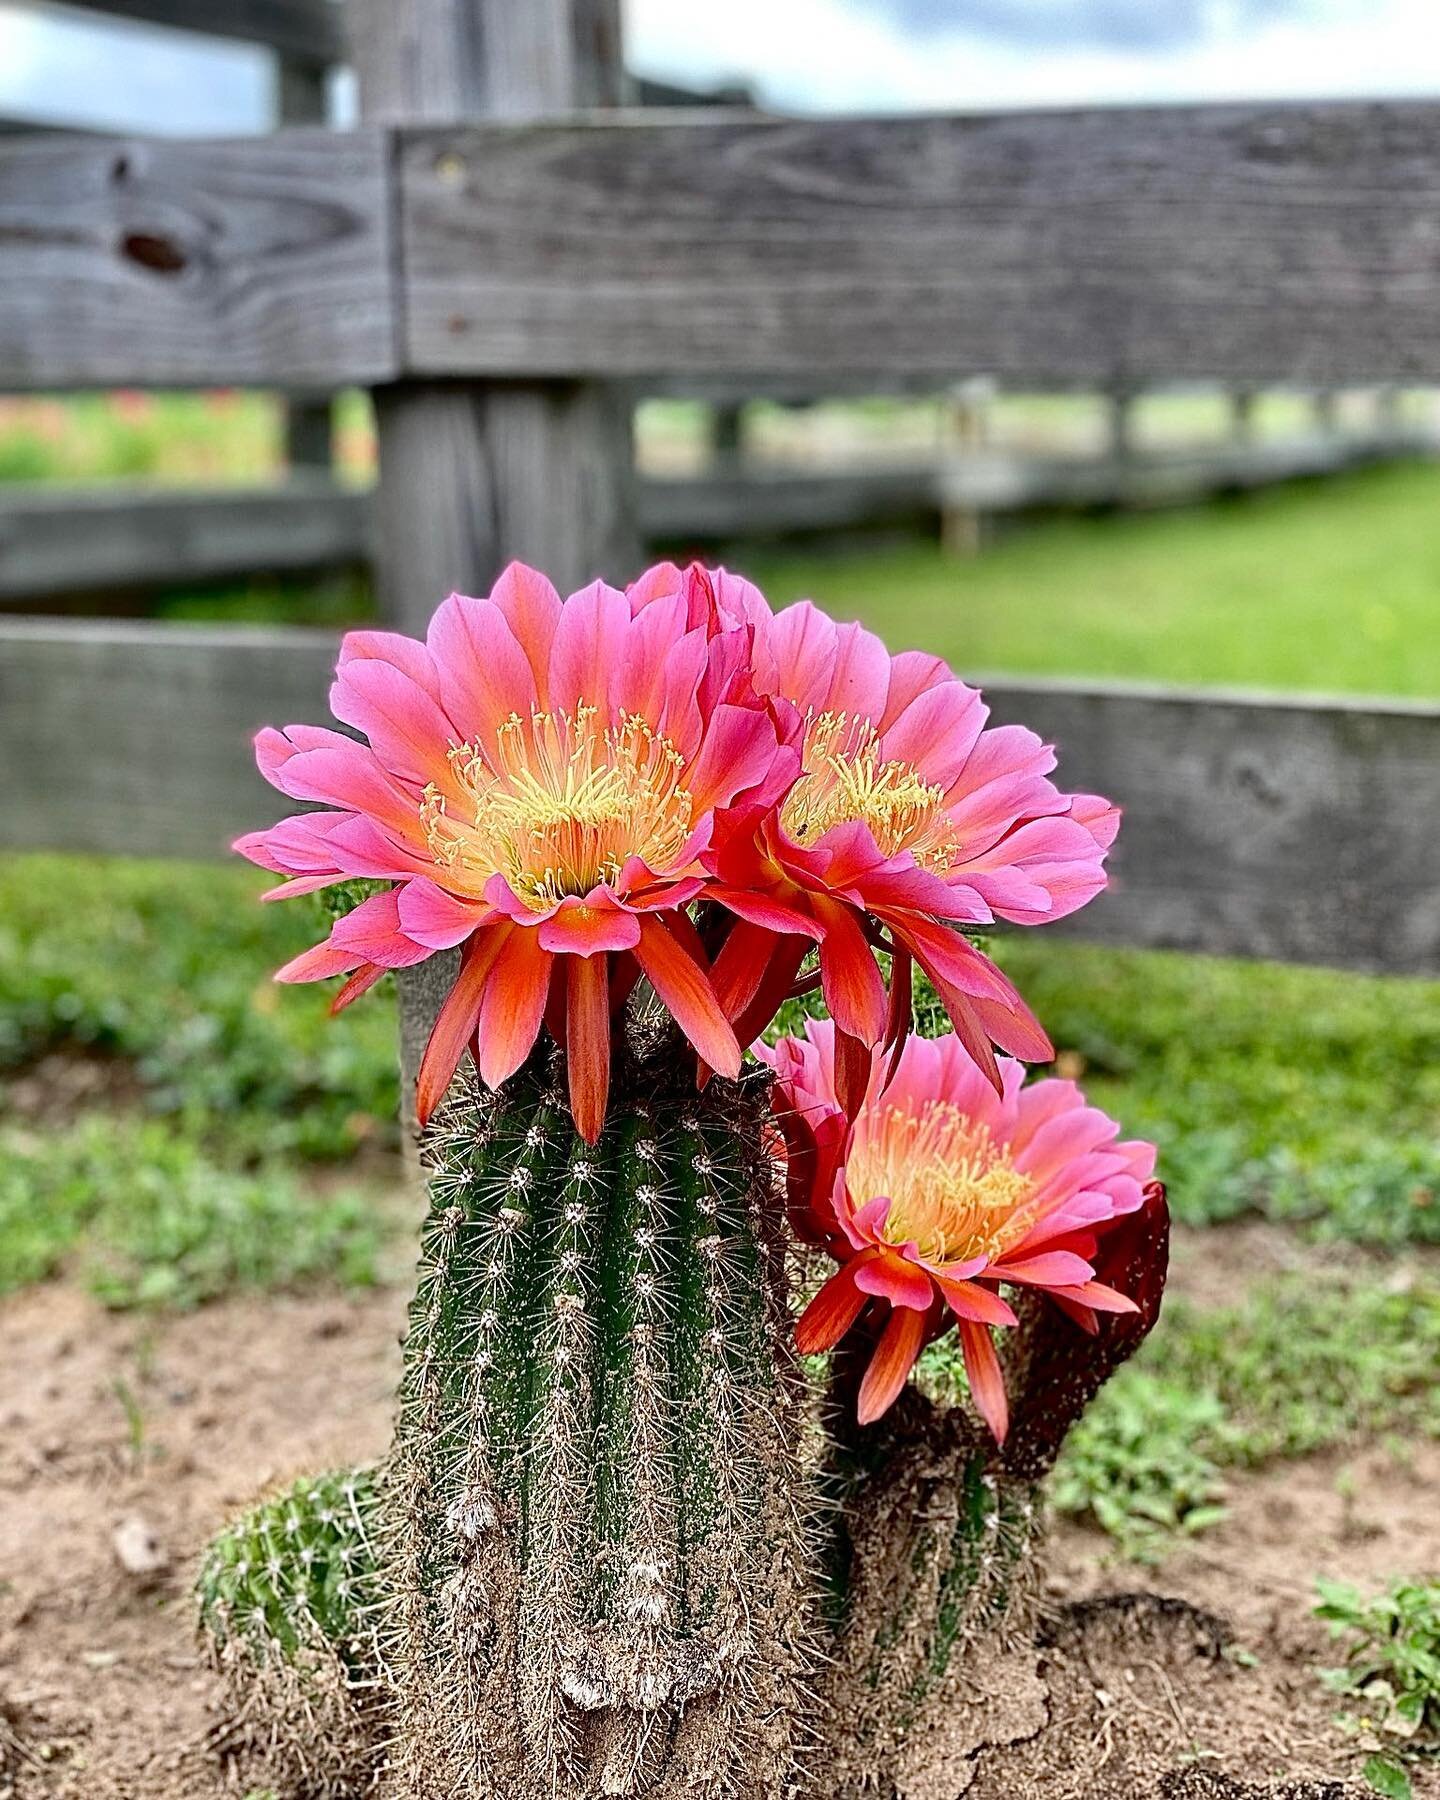 ცɛ ۷ıცཞąŋɬ🌵🌸💛
&bull;
Just look at the blooms on this cactus at the farm!  The vibrant colors bring such happiness 💕
&bull;
&bull;
&bull;
#starhill #starhillfarm #starhillfarms #be #vibrant #beautiful #cactus #yellow #bloom #friday #cacti #instago